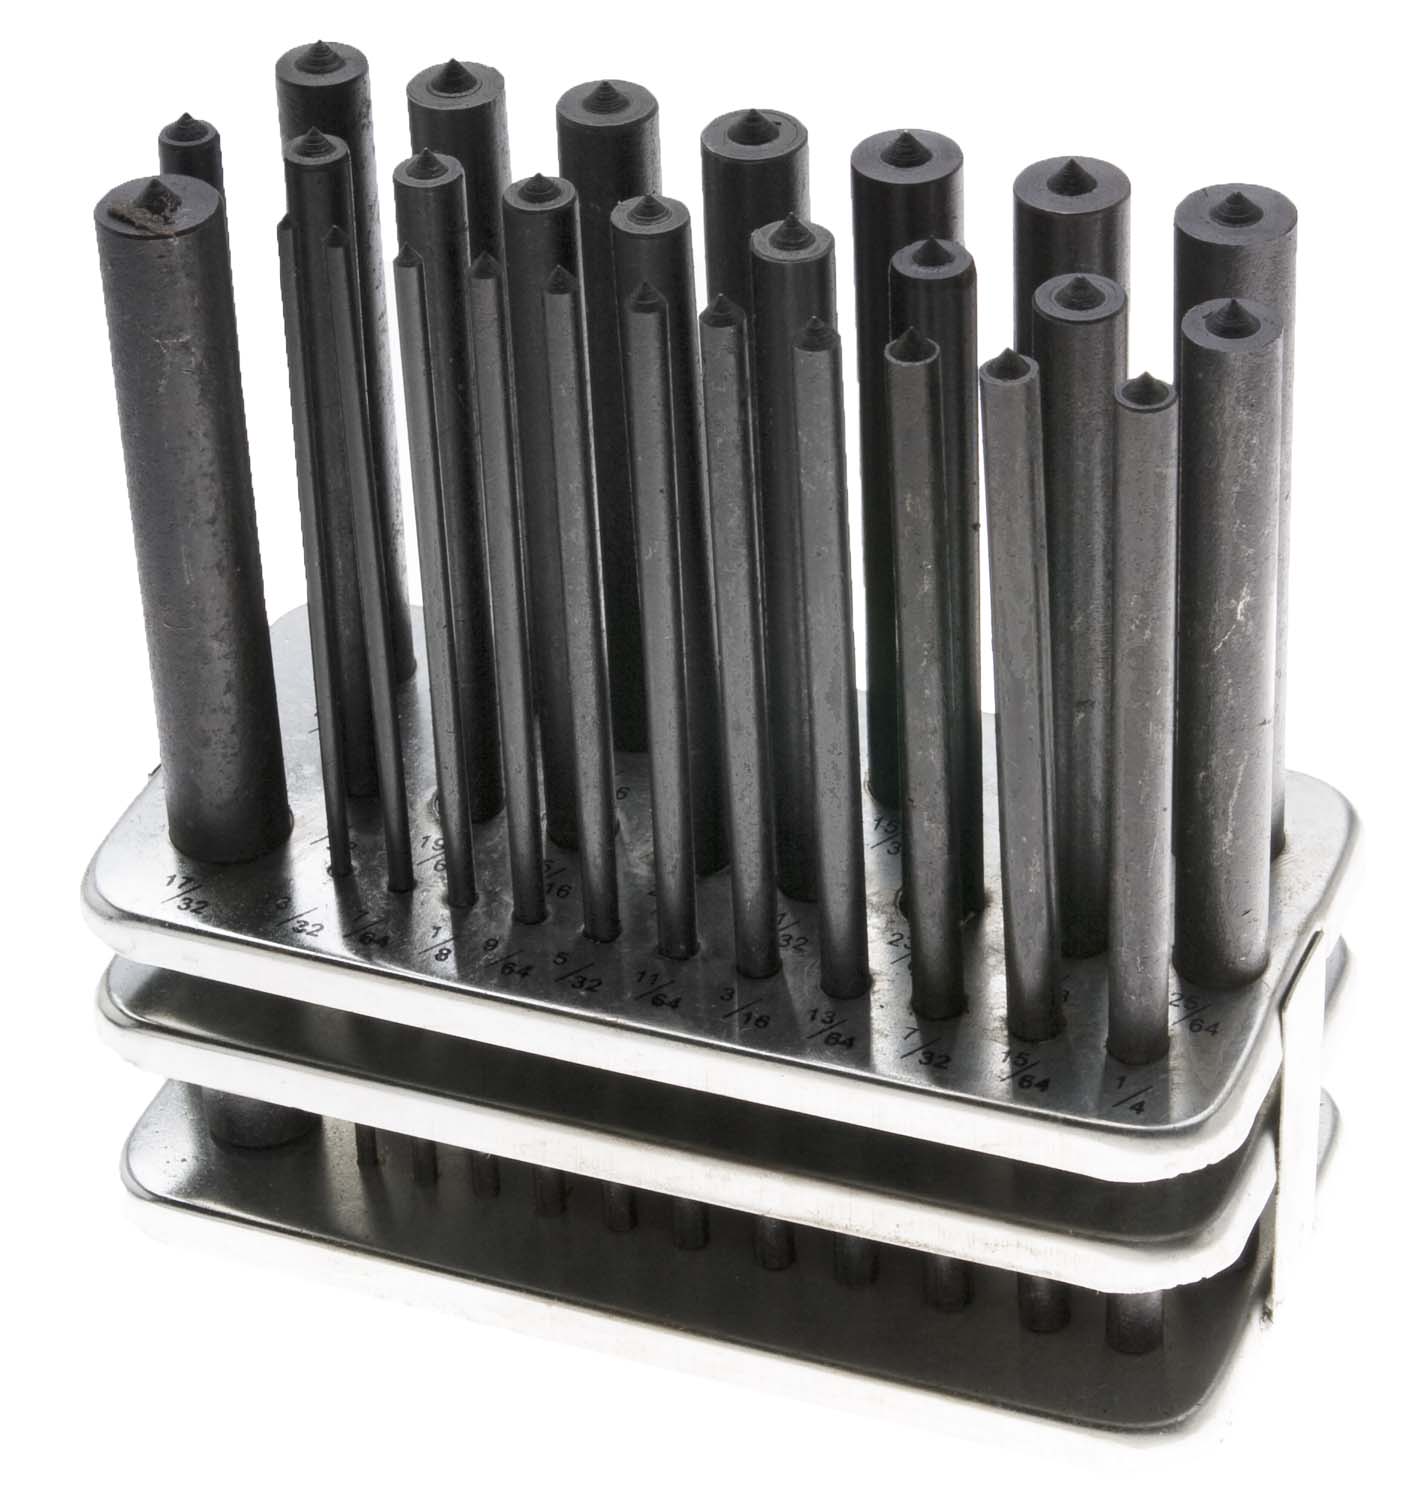 TP-03 1-13mm Metric Transfer Punch Set - 25 Pieces